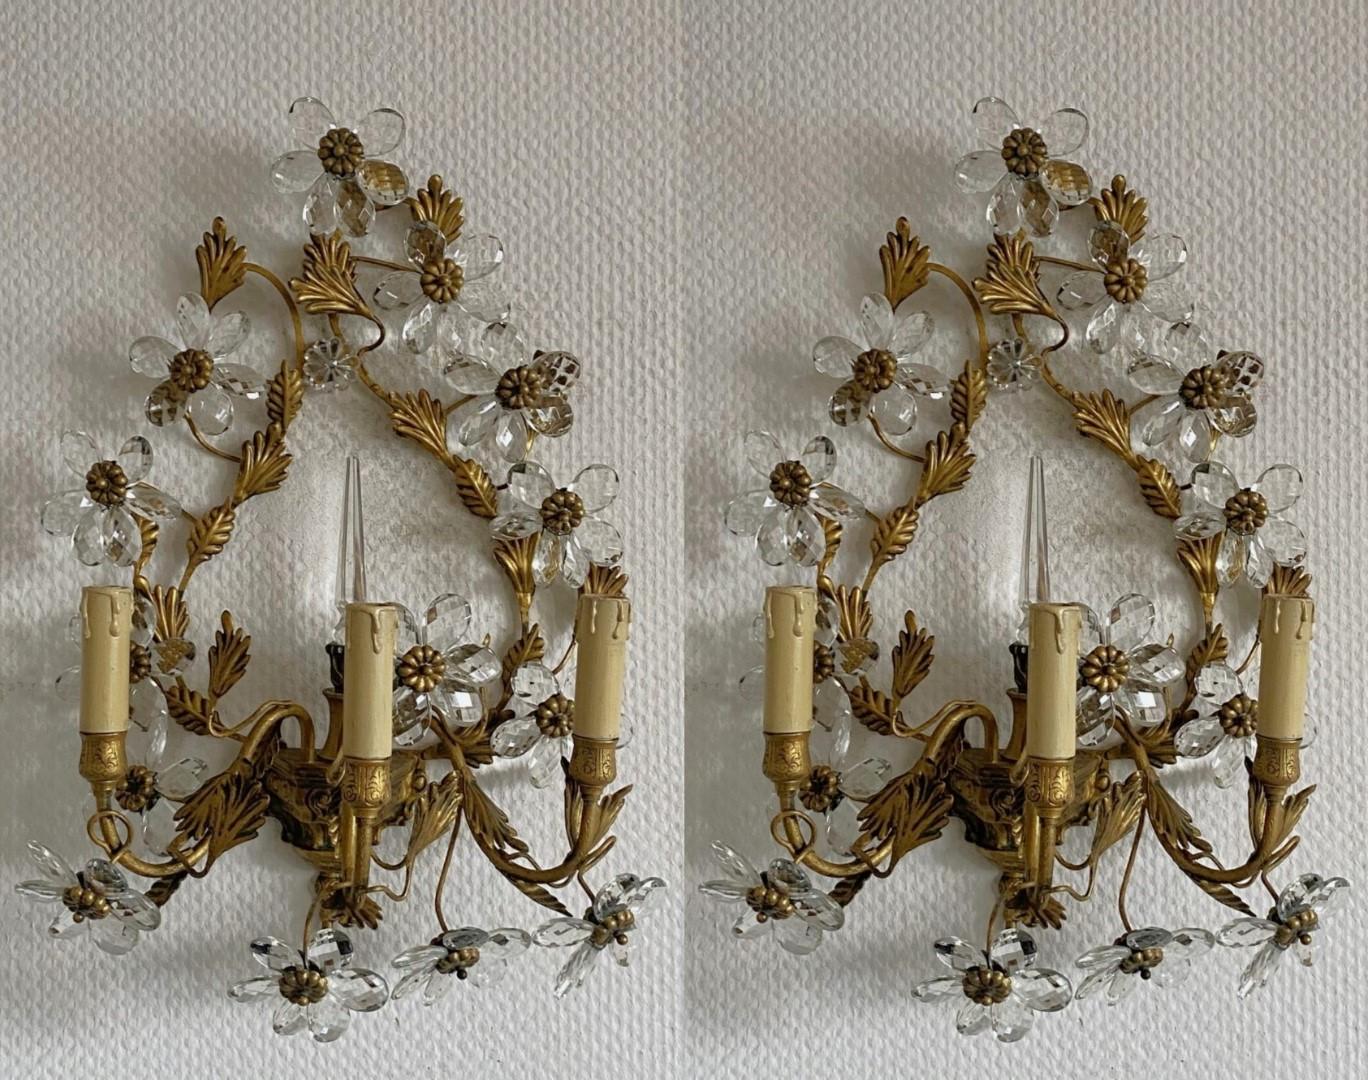  Amazing, rare pair of large Maison Bagès gilded wrought iron three-arm wall sconces, France, 1930s. Wonderful handcrafted  gilded wrought iron leaf environment, enriched with clear faceted crystal flowers and a crystal obelisk in the center,